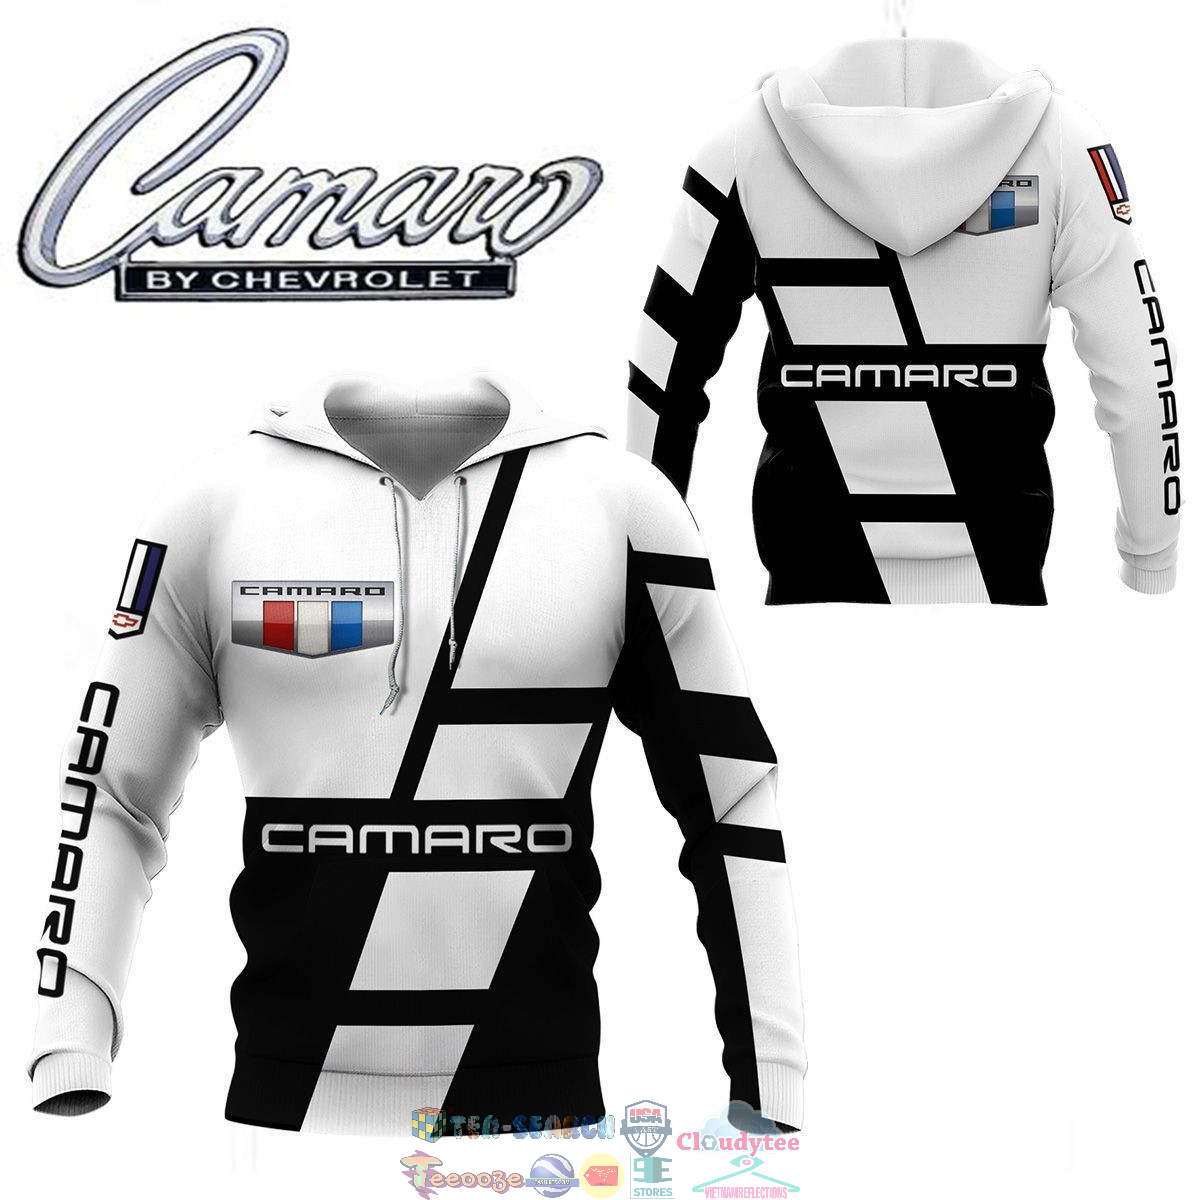 Chevrolet Camaro ver 9 3D hoodie and t-shirt